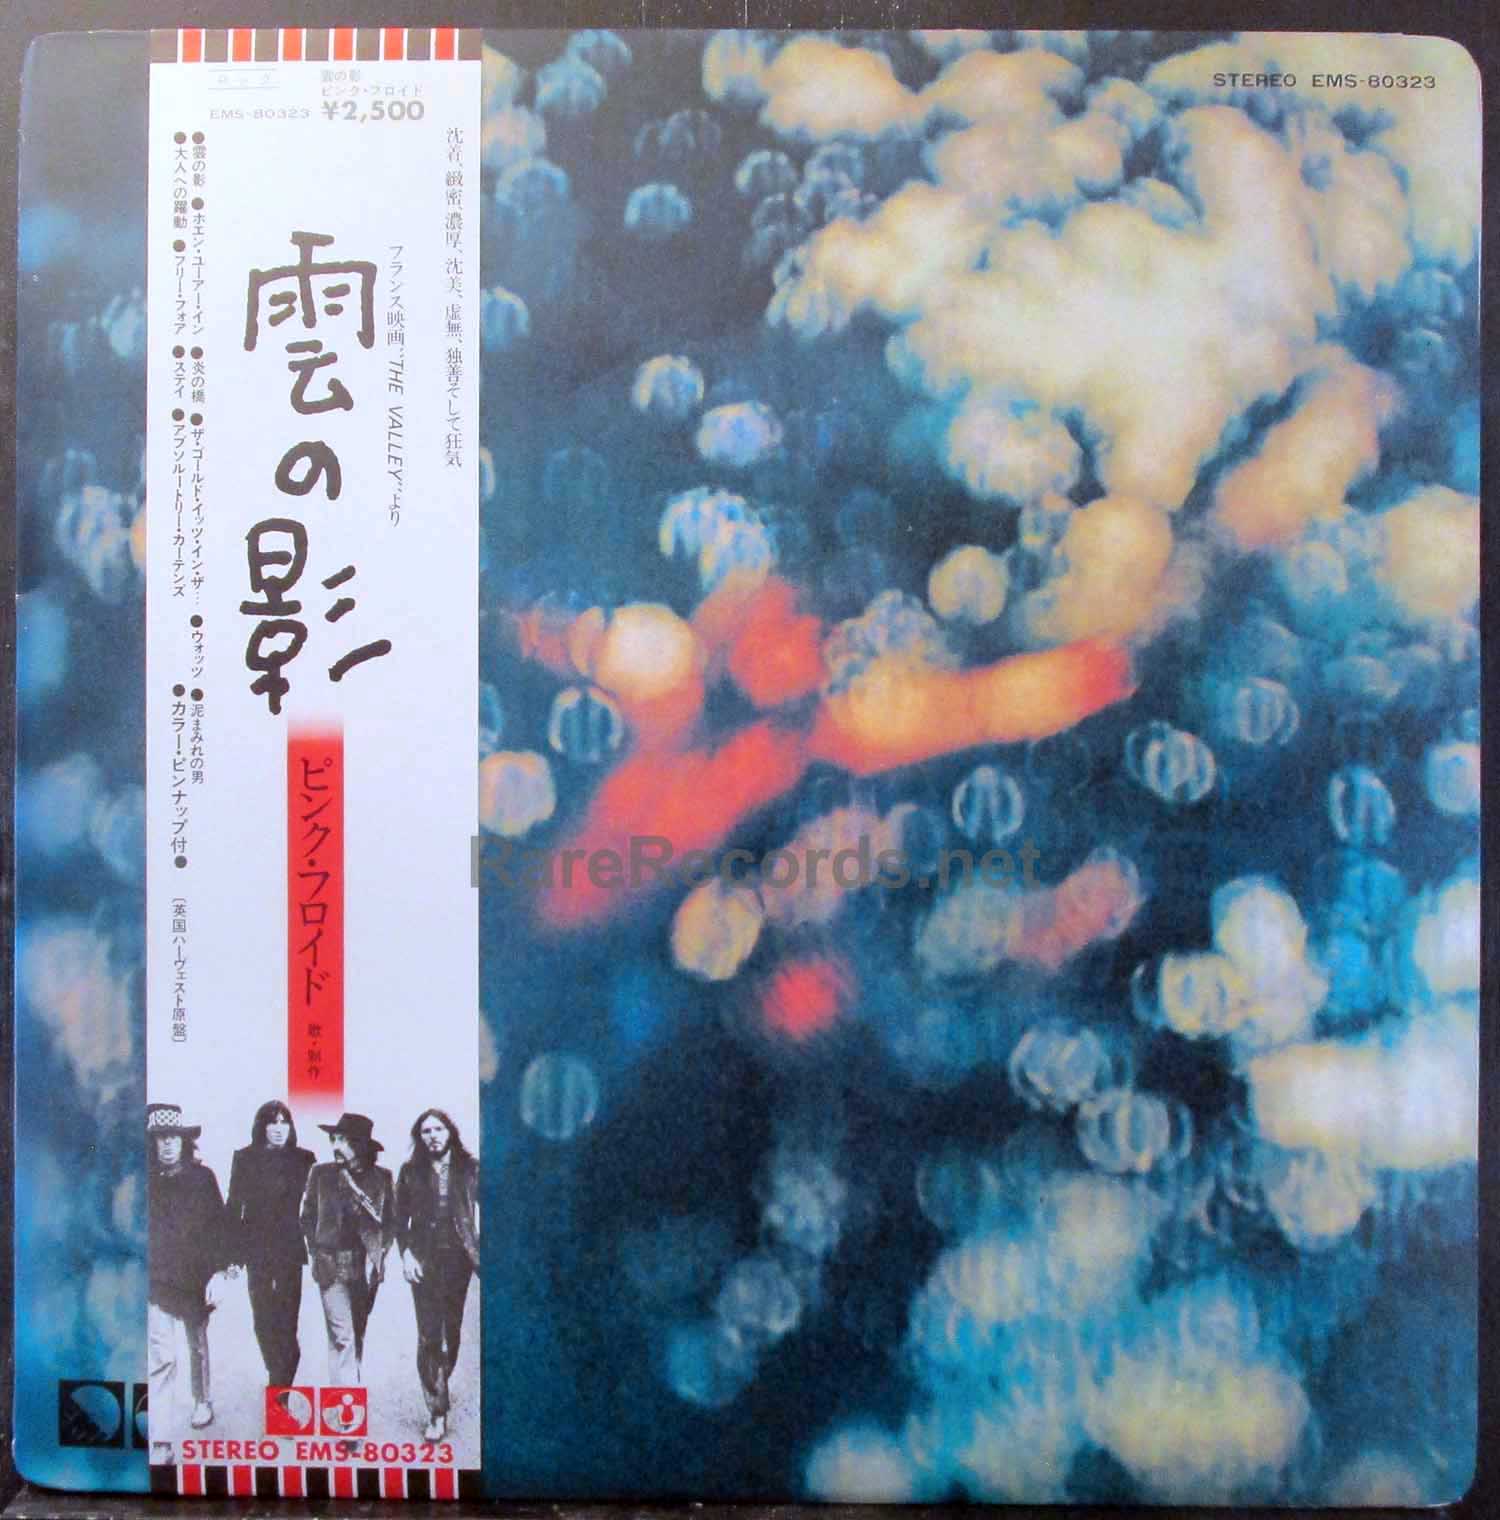 Pink Floyd - Obscured by Clouds Japan LP